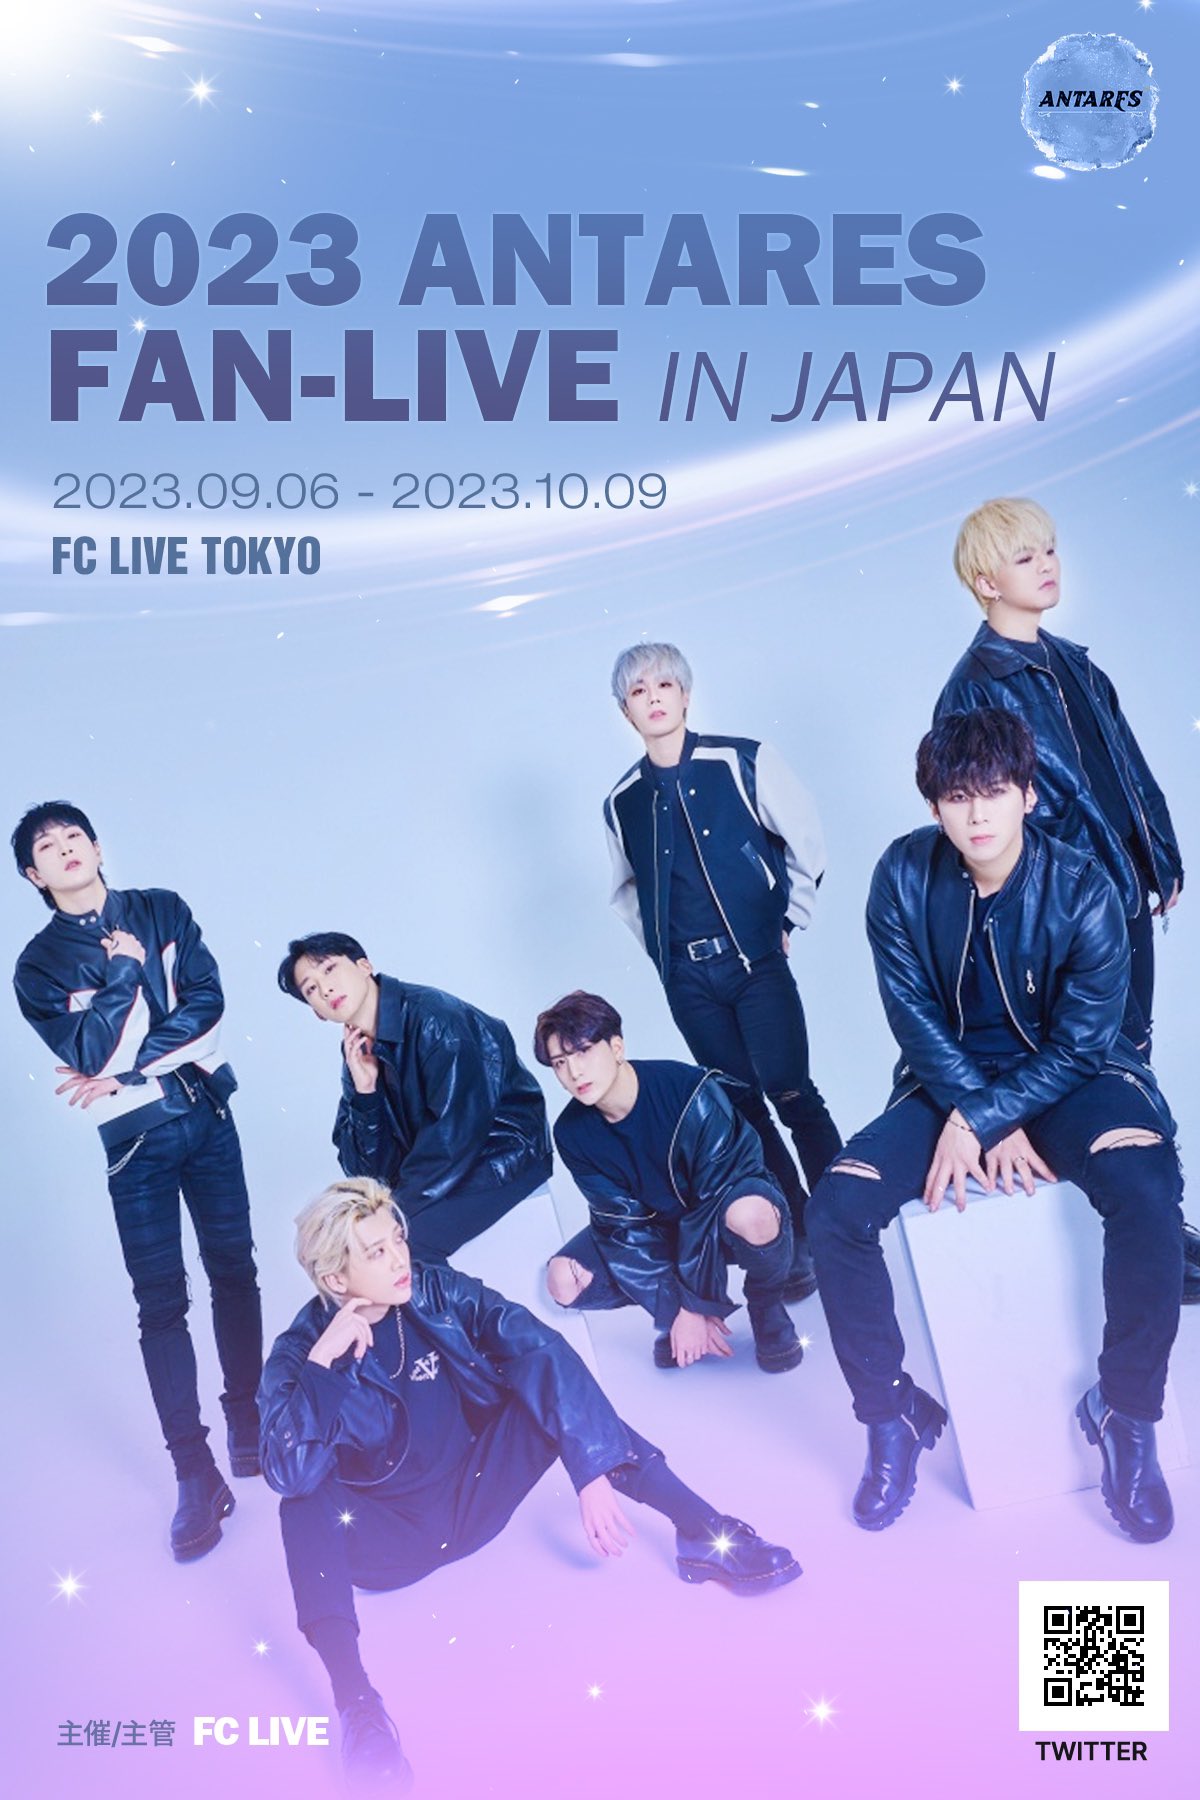 2023 ANTARES FAN-LIVE IN JAPAN ※友達紹介イベント1+1